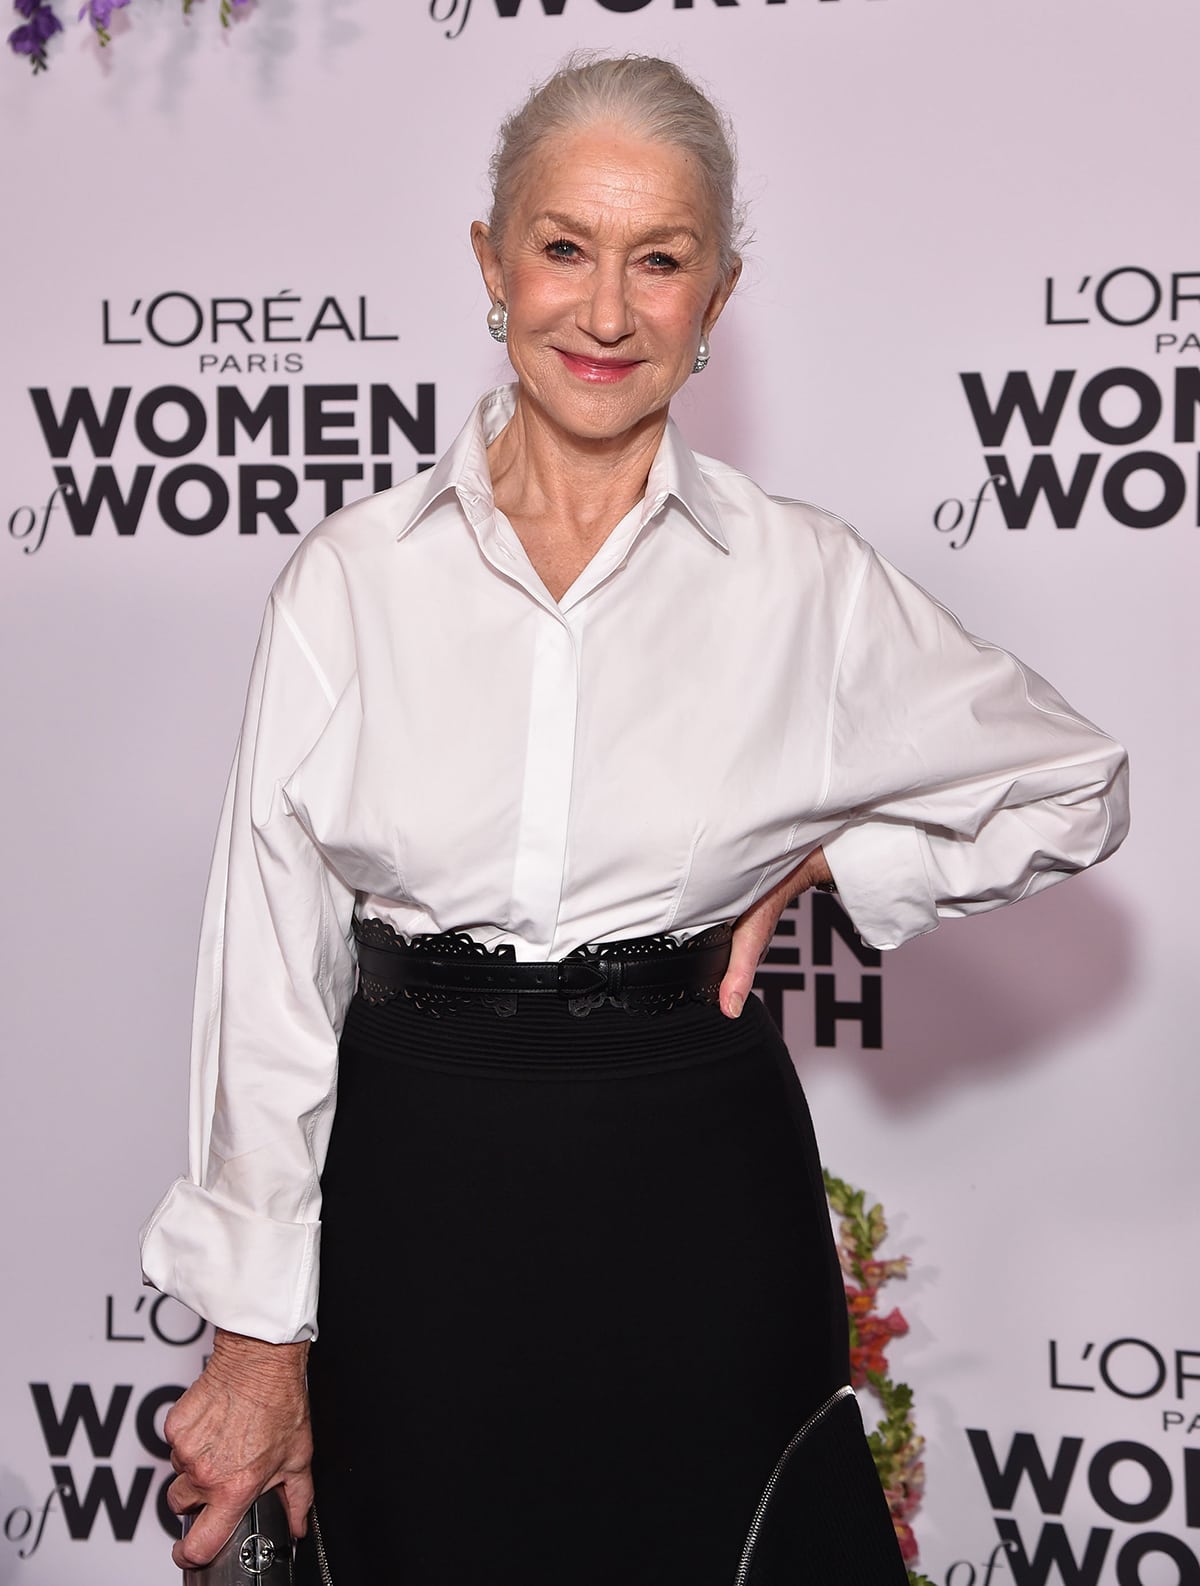 Helen Mirren styles her gray hair in a bun and adds a pop of color to her look with pink lipstick